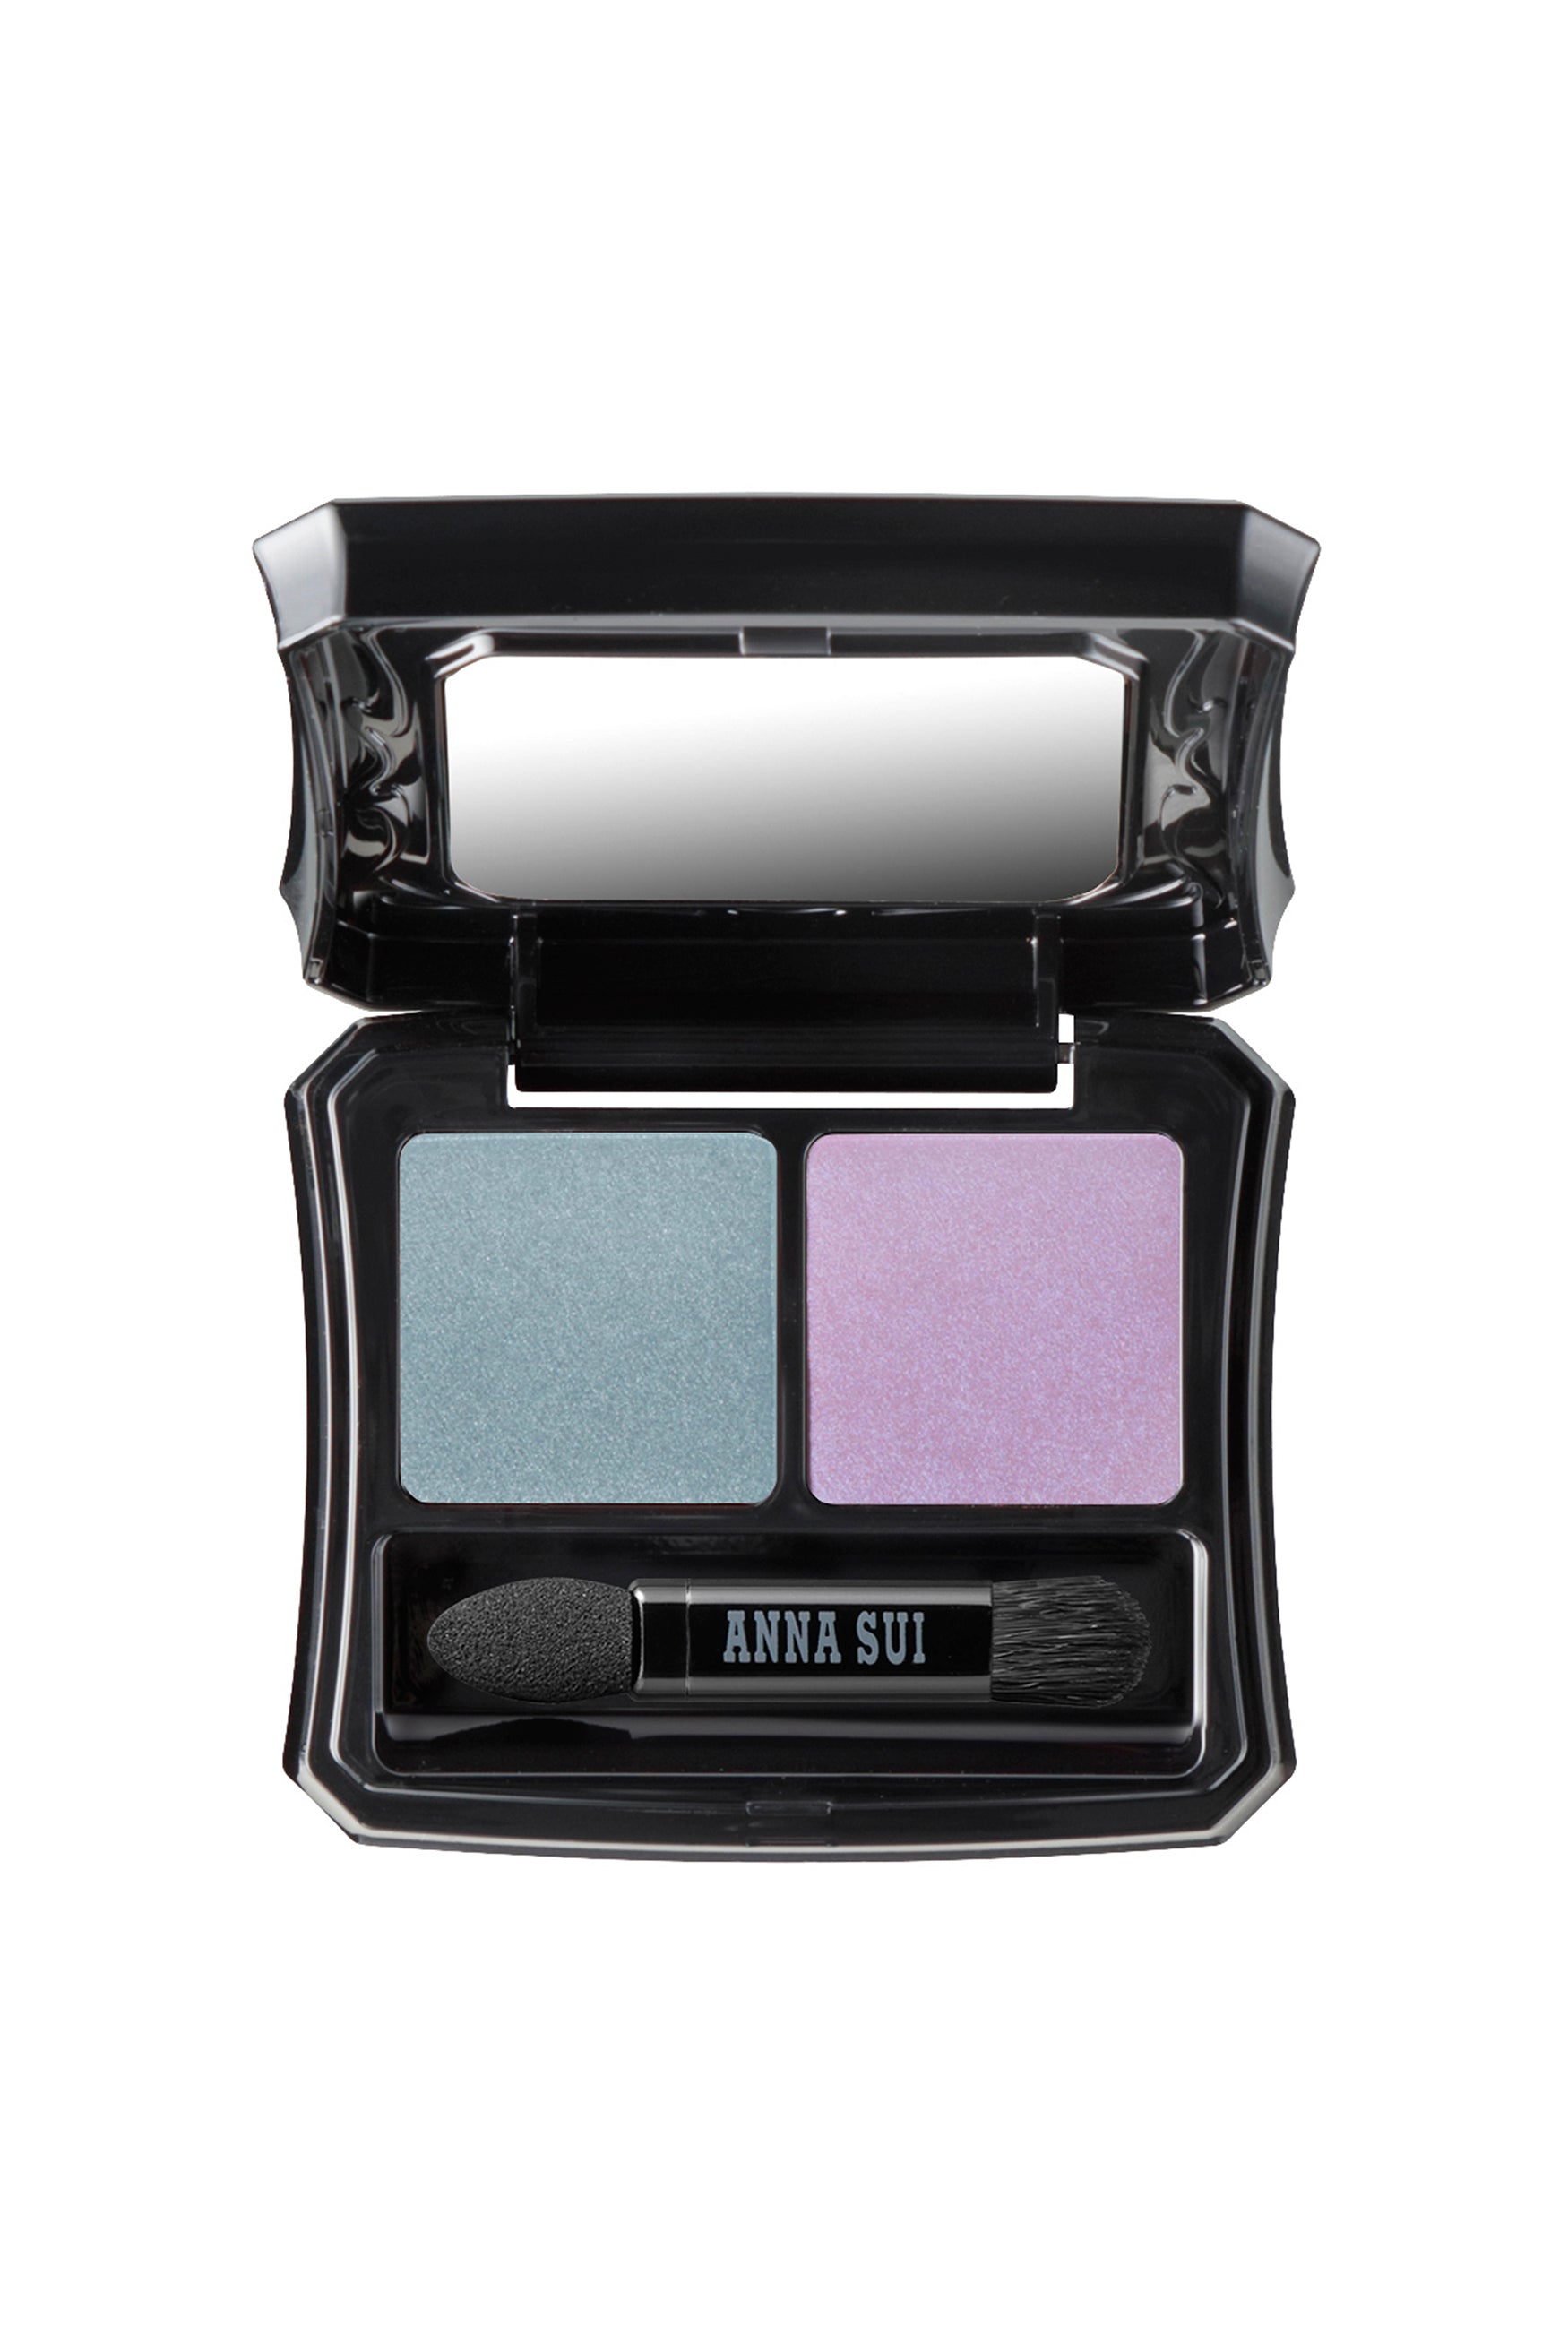 LAKESHORE & LAVENDER HAZE in a square container, curvy sides, with Anna Sui applicator & mirror